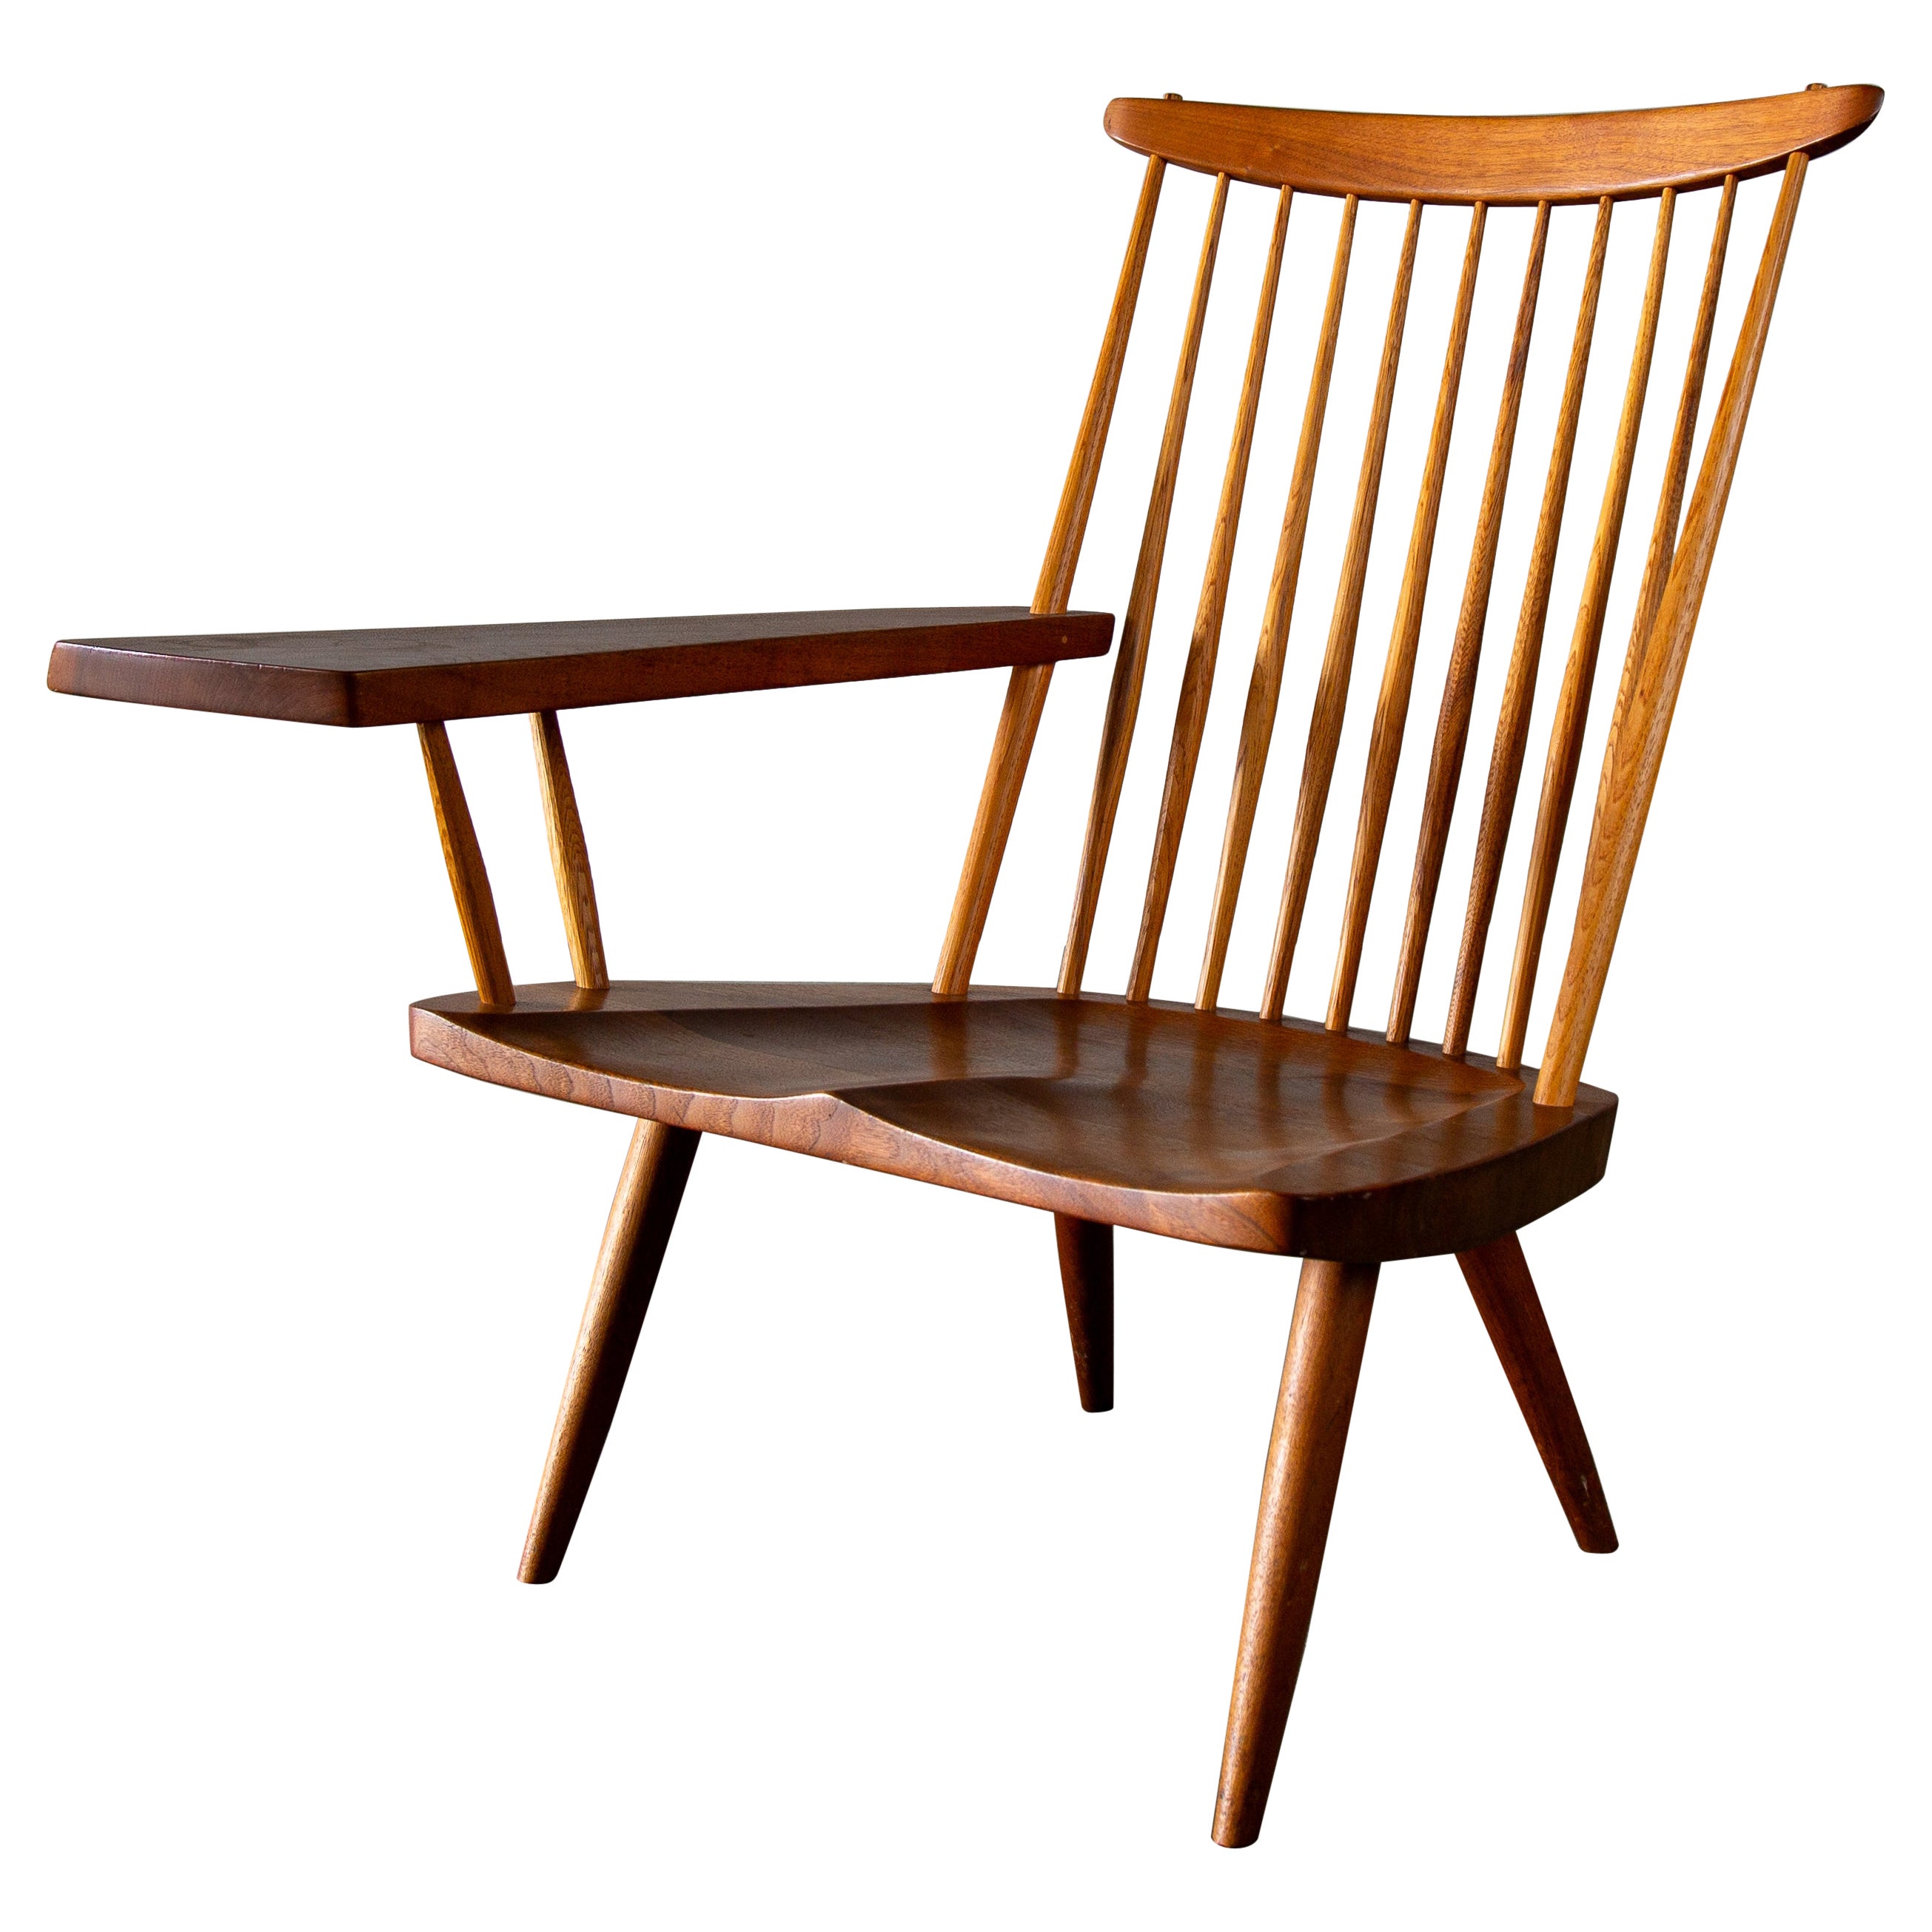 1975 George Nakashima Studio Lounge Chair with Free Form Arm Noyer et Hickory